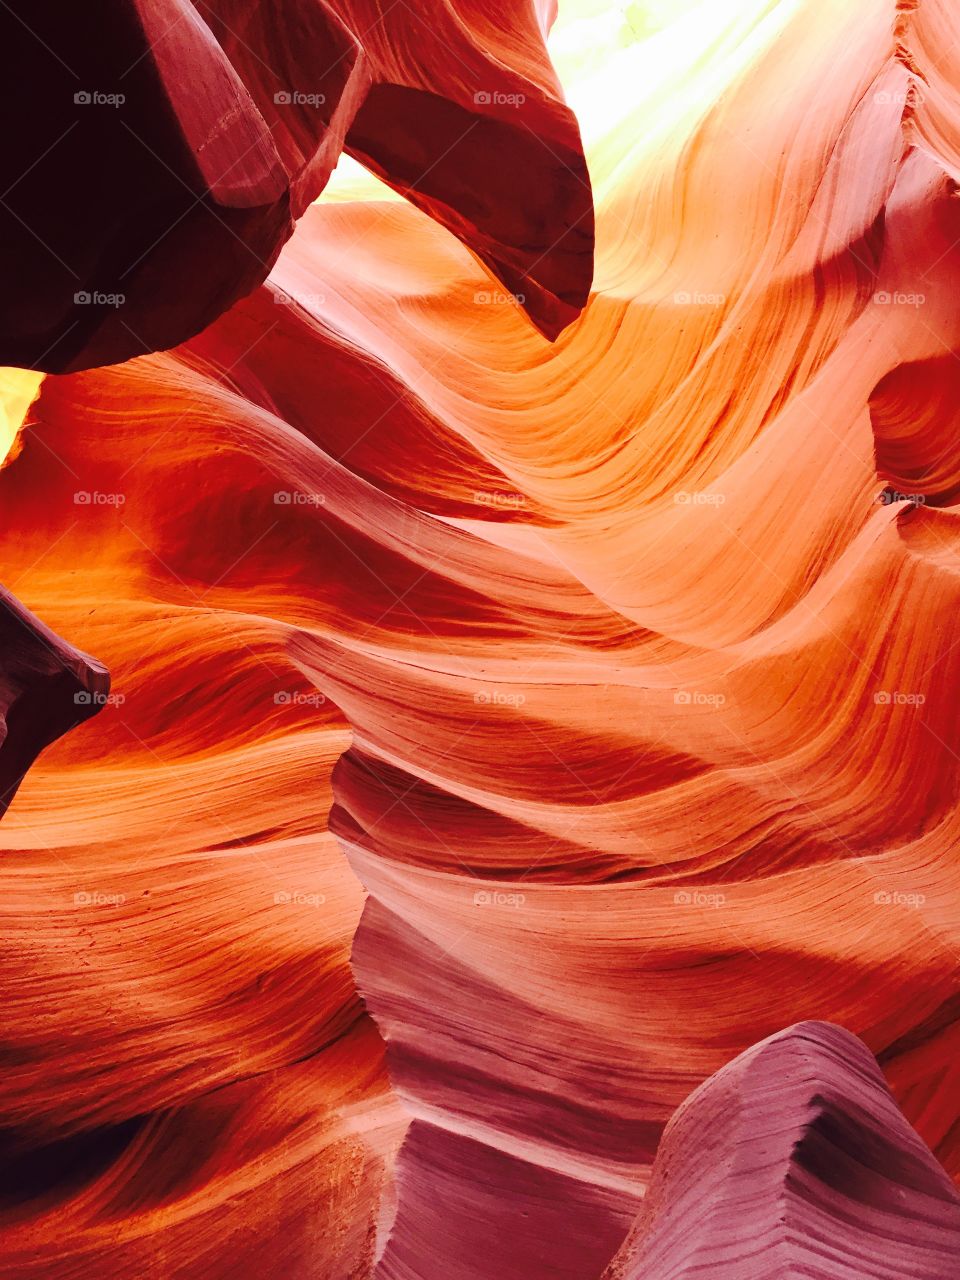 Antelope Canyon peaks and valleys 